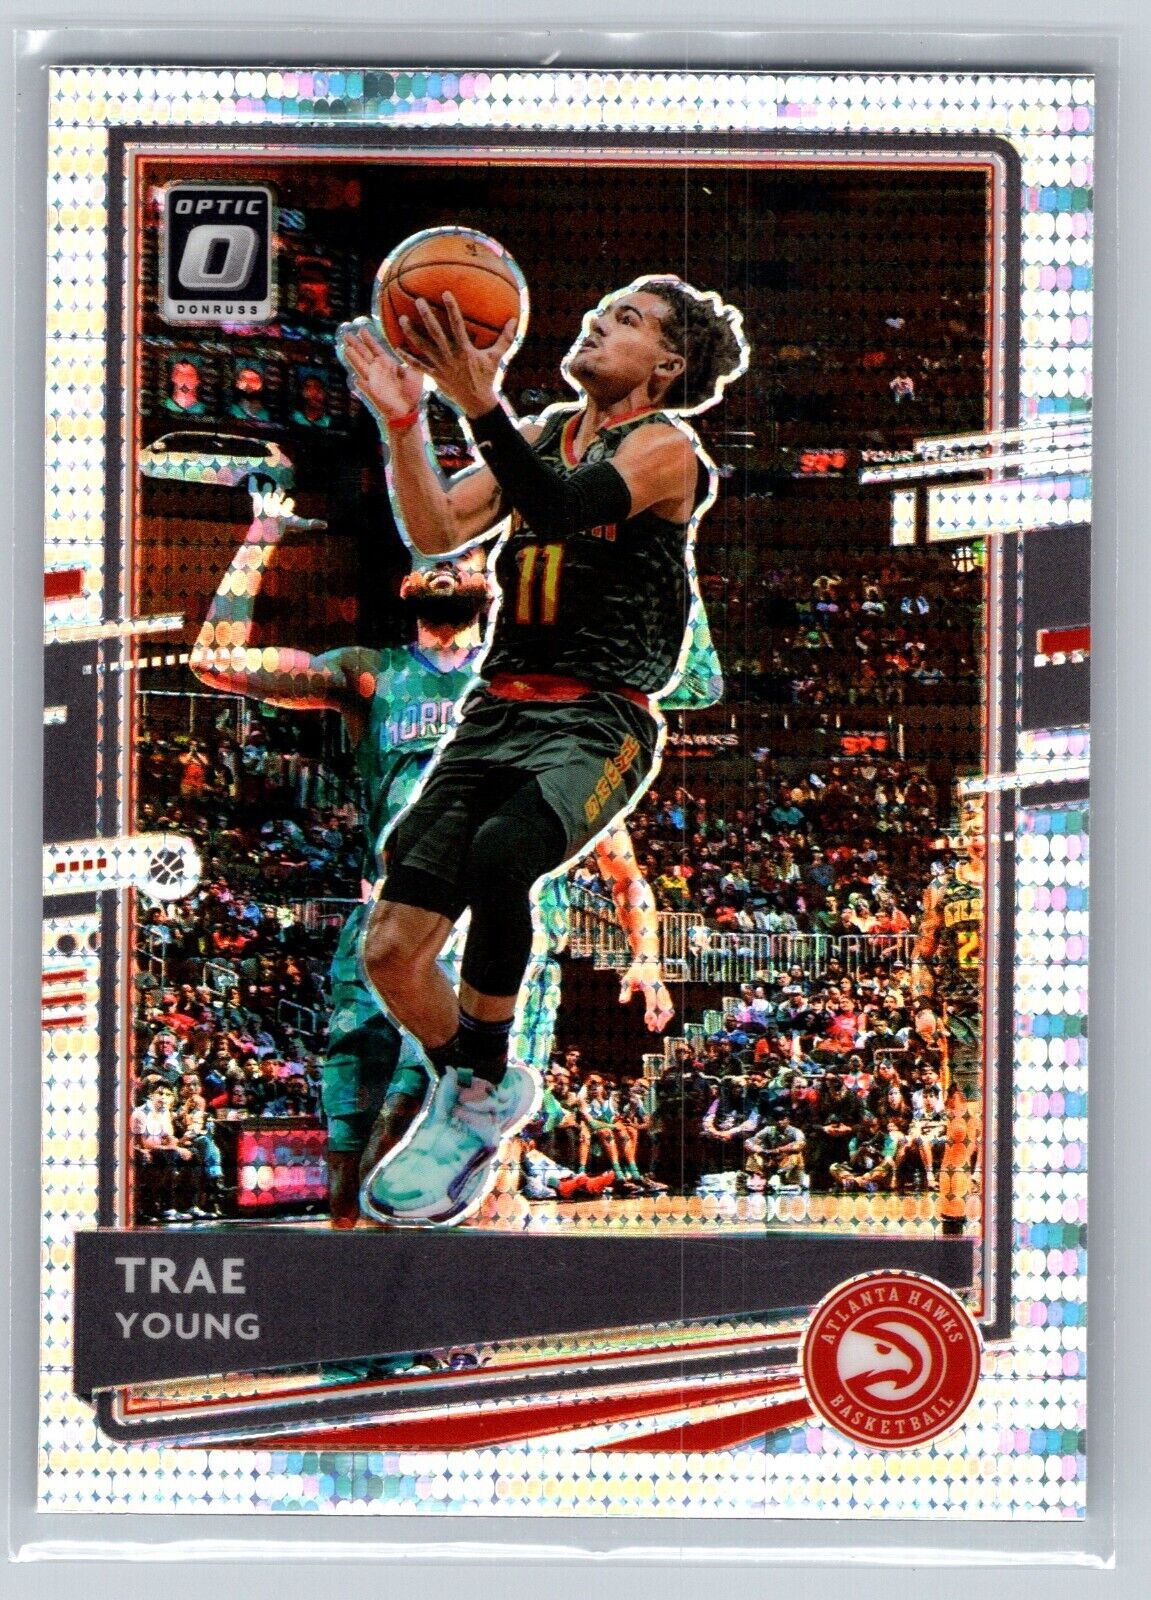 2020-21 Donruss Optic Target Exclusive Trae Young #2 Silver Pulsar Prizm Hawks